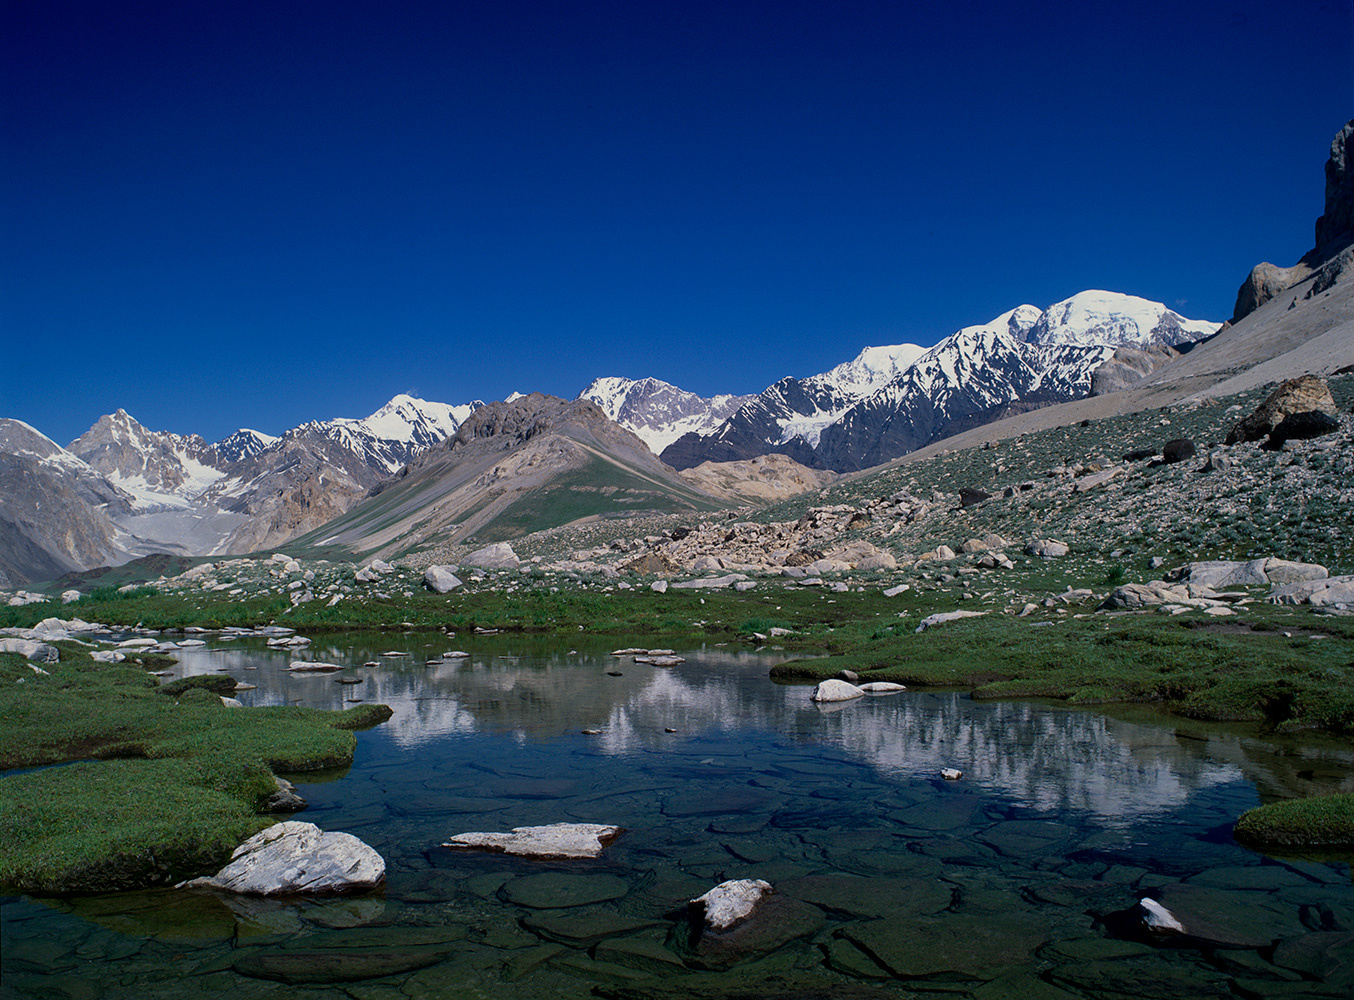 The Shah Jinali pass links the upper Turikho valley with the village of Lasht in the Yasrkhun. This picture was taken looking south into the upper Shah Jinali Gol from the meadows immediately below the col. The name Sha Jinali means {quote}King's Polo Ground{quote}.Bronica ETRSi, Fuji Velvia